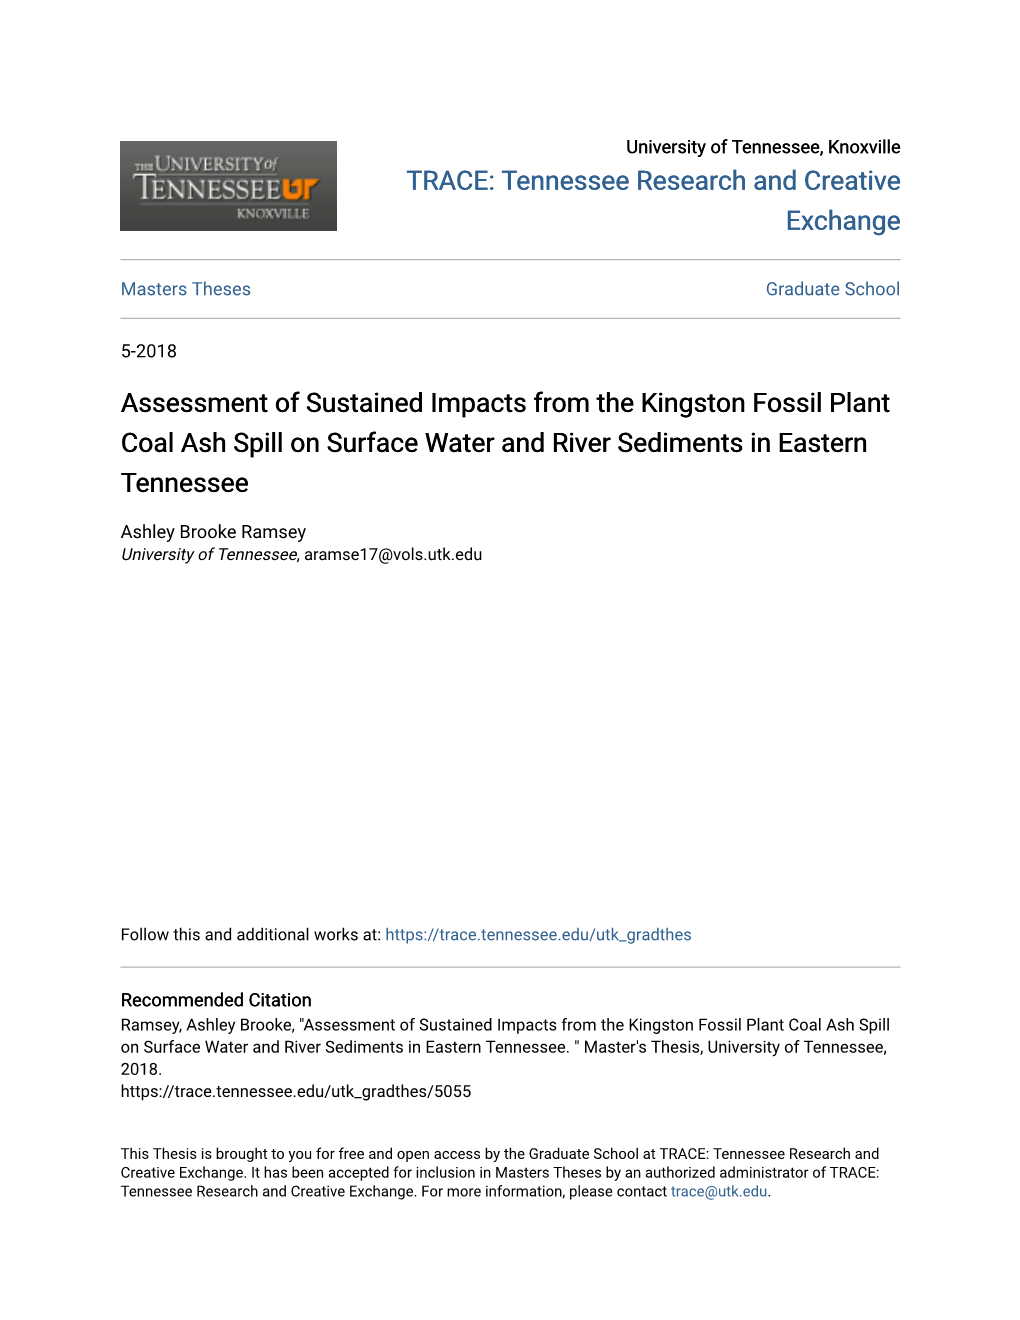 Assessment of Sustained Impacts from the Kingston Fossil Plant Coal Ash Spill on Surface Water and River Sediments in Eastern Tennessee